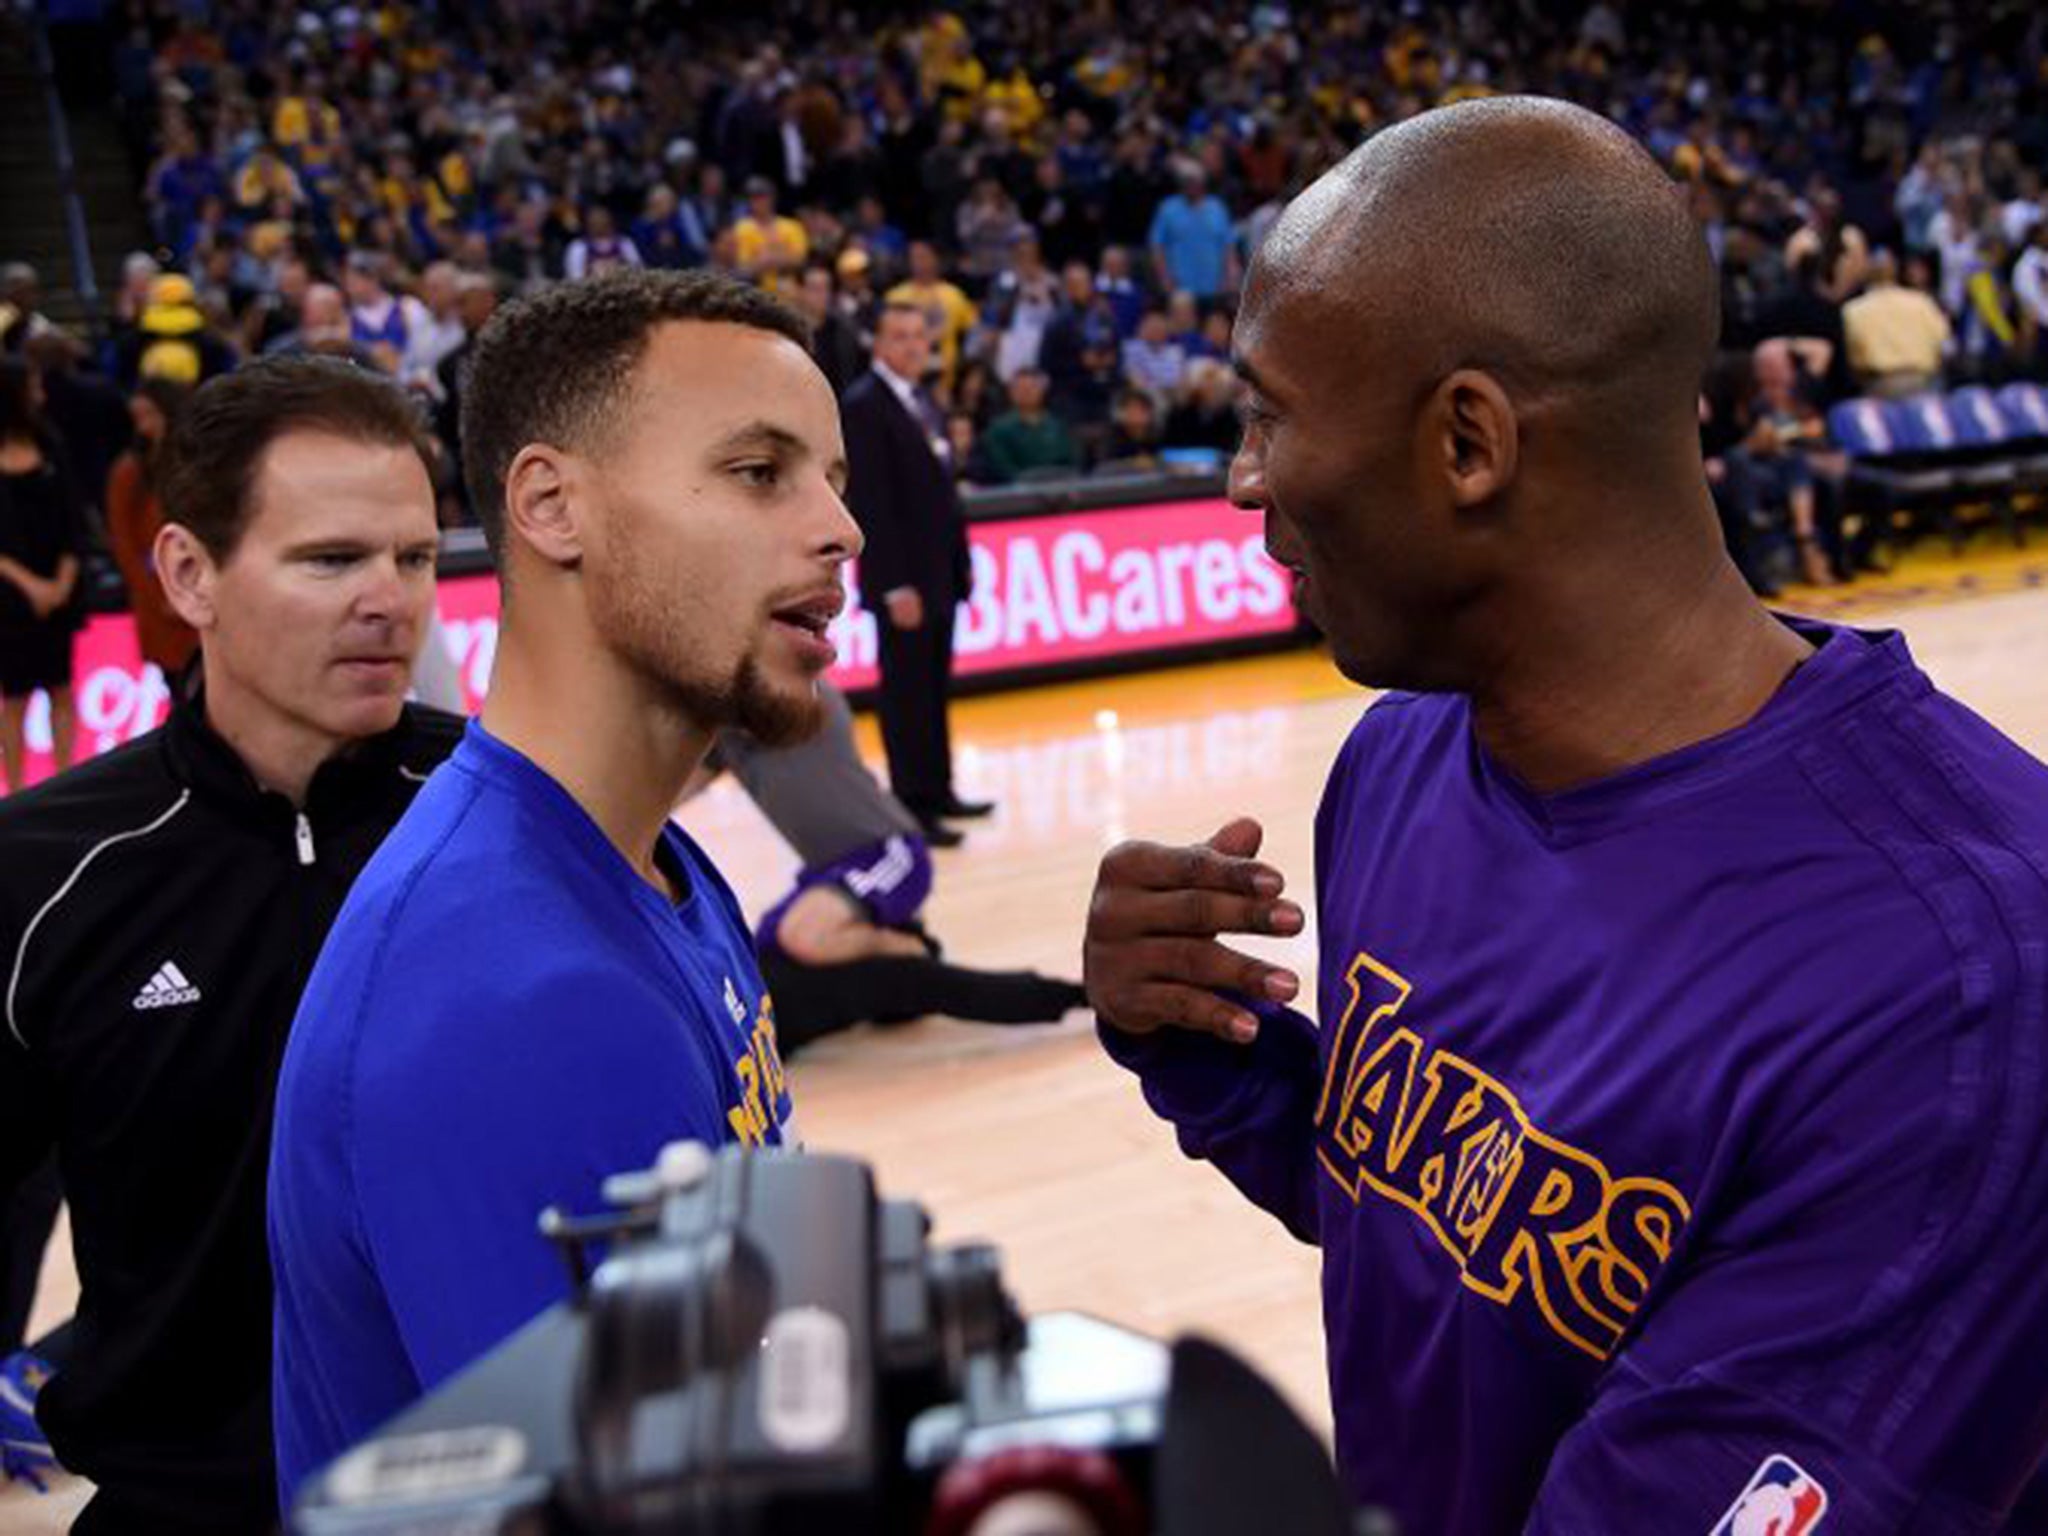 Steph Curry (left), of the Golden State Warriors, and Los Angeles Lakers’ Kobe Bryant chat before their NBA game in Oakland last month